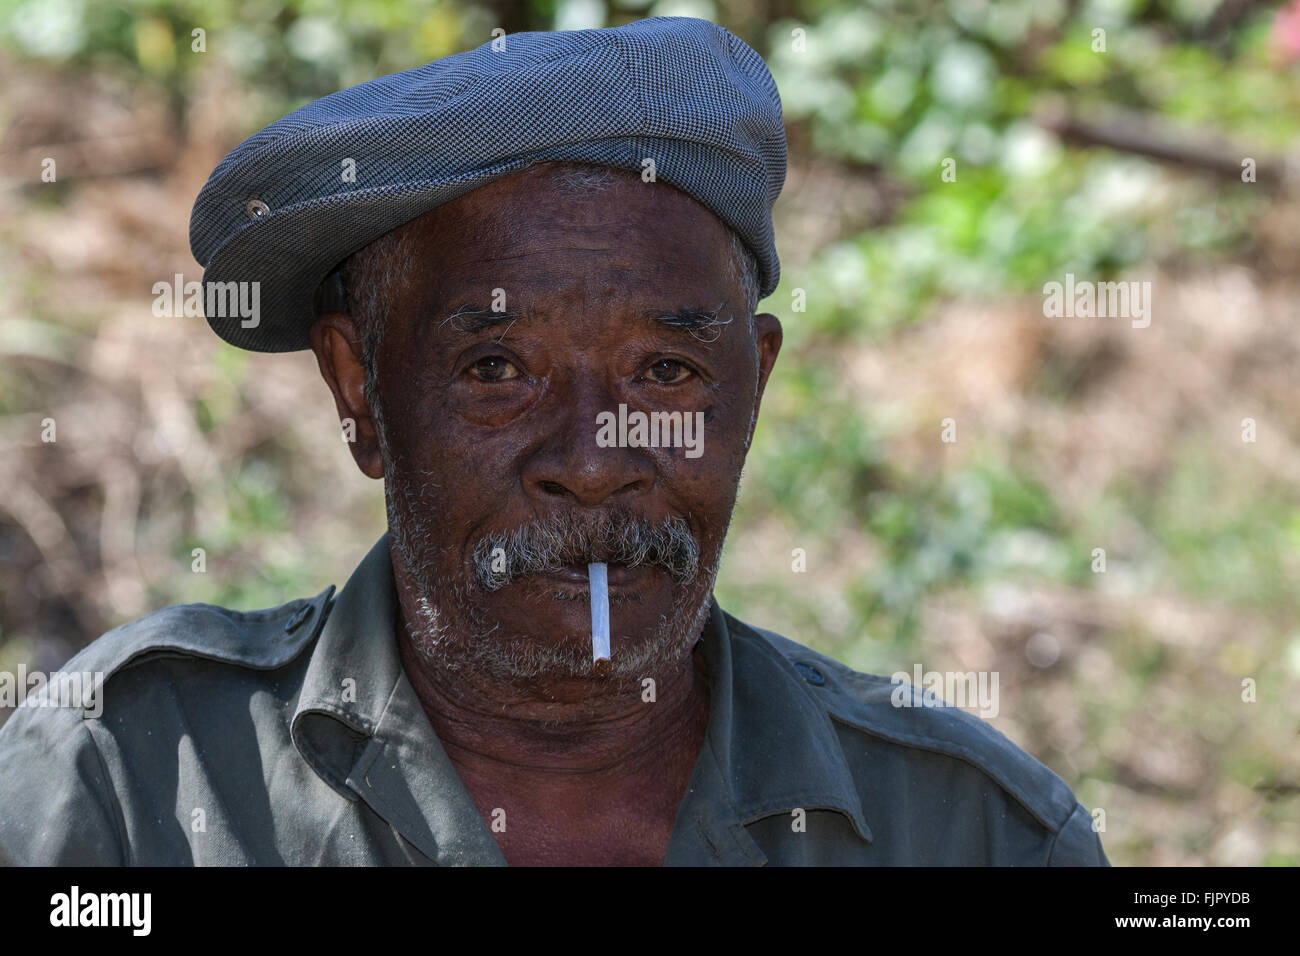 Local man with a cigarette and cap, portrait, Reunion Stock Photo